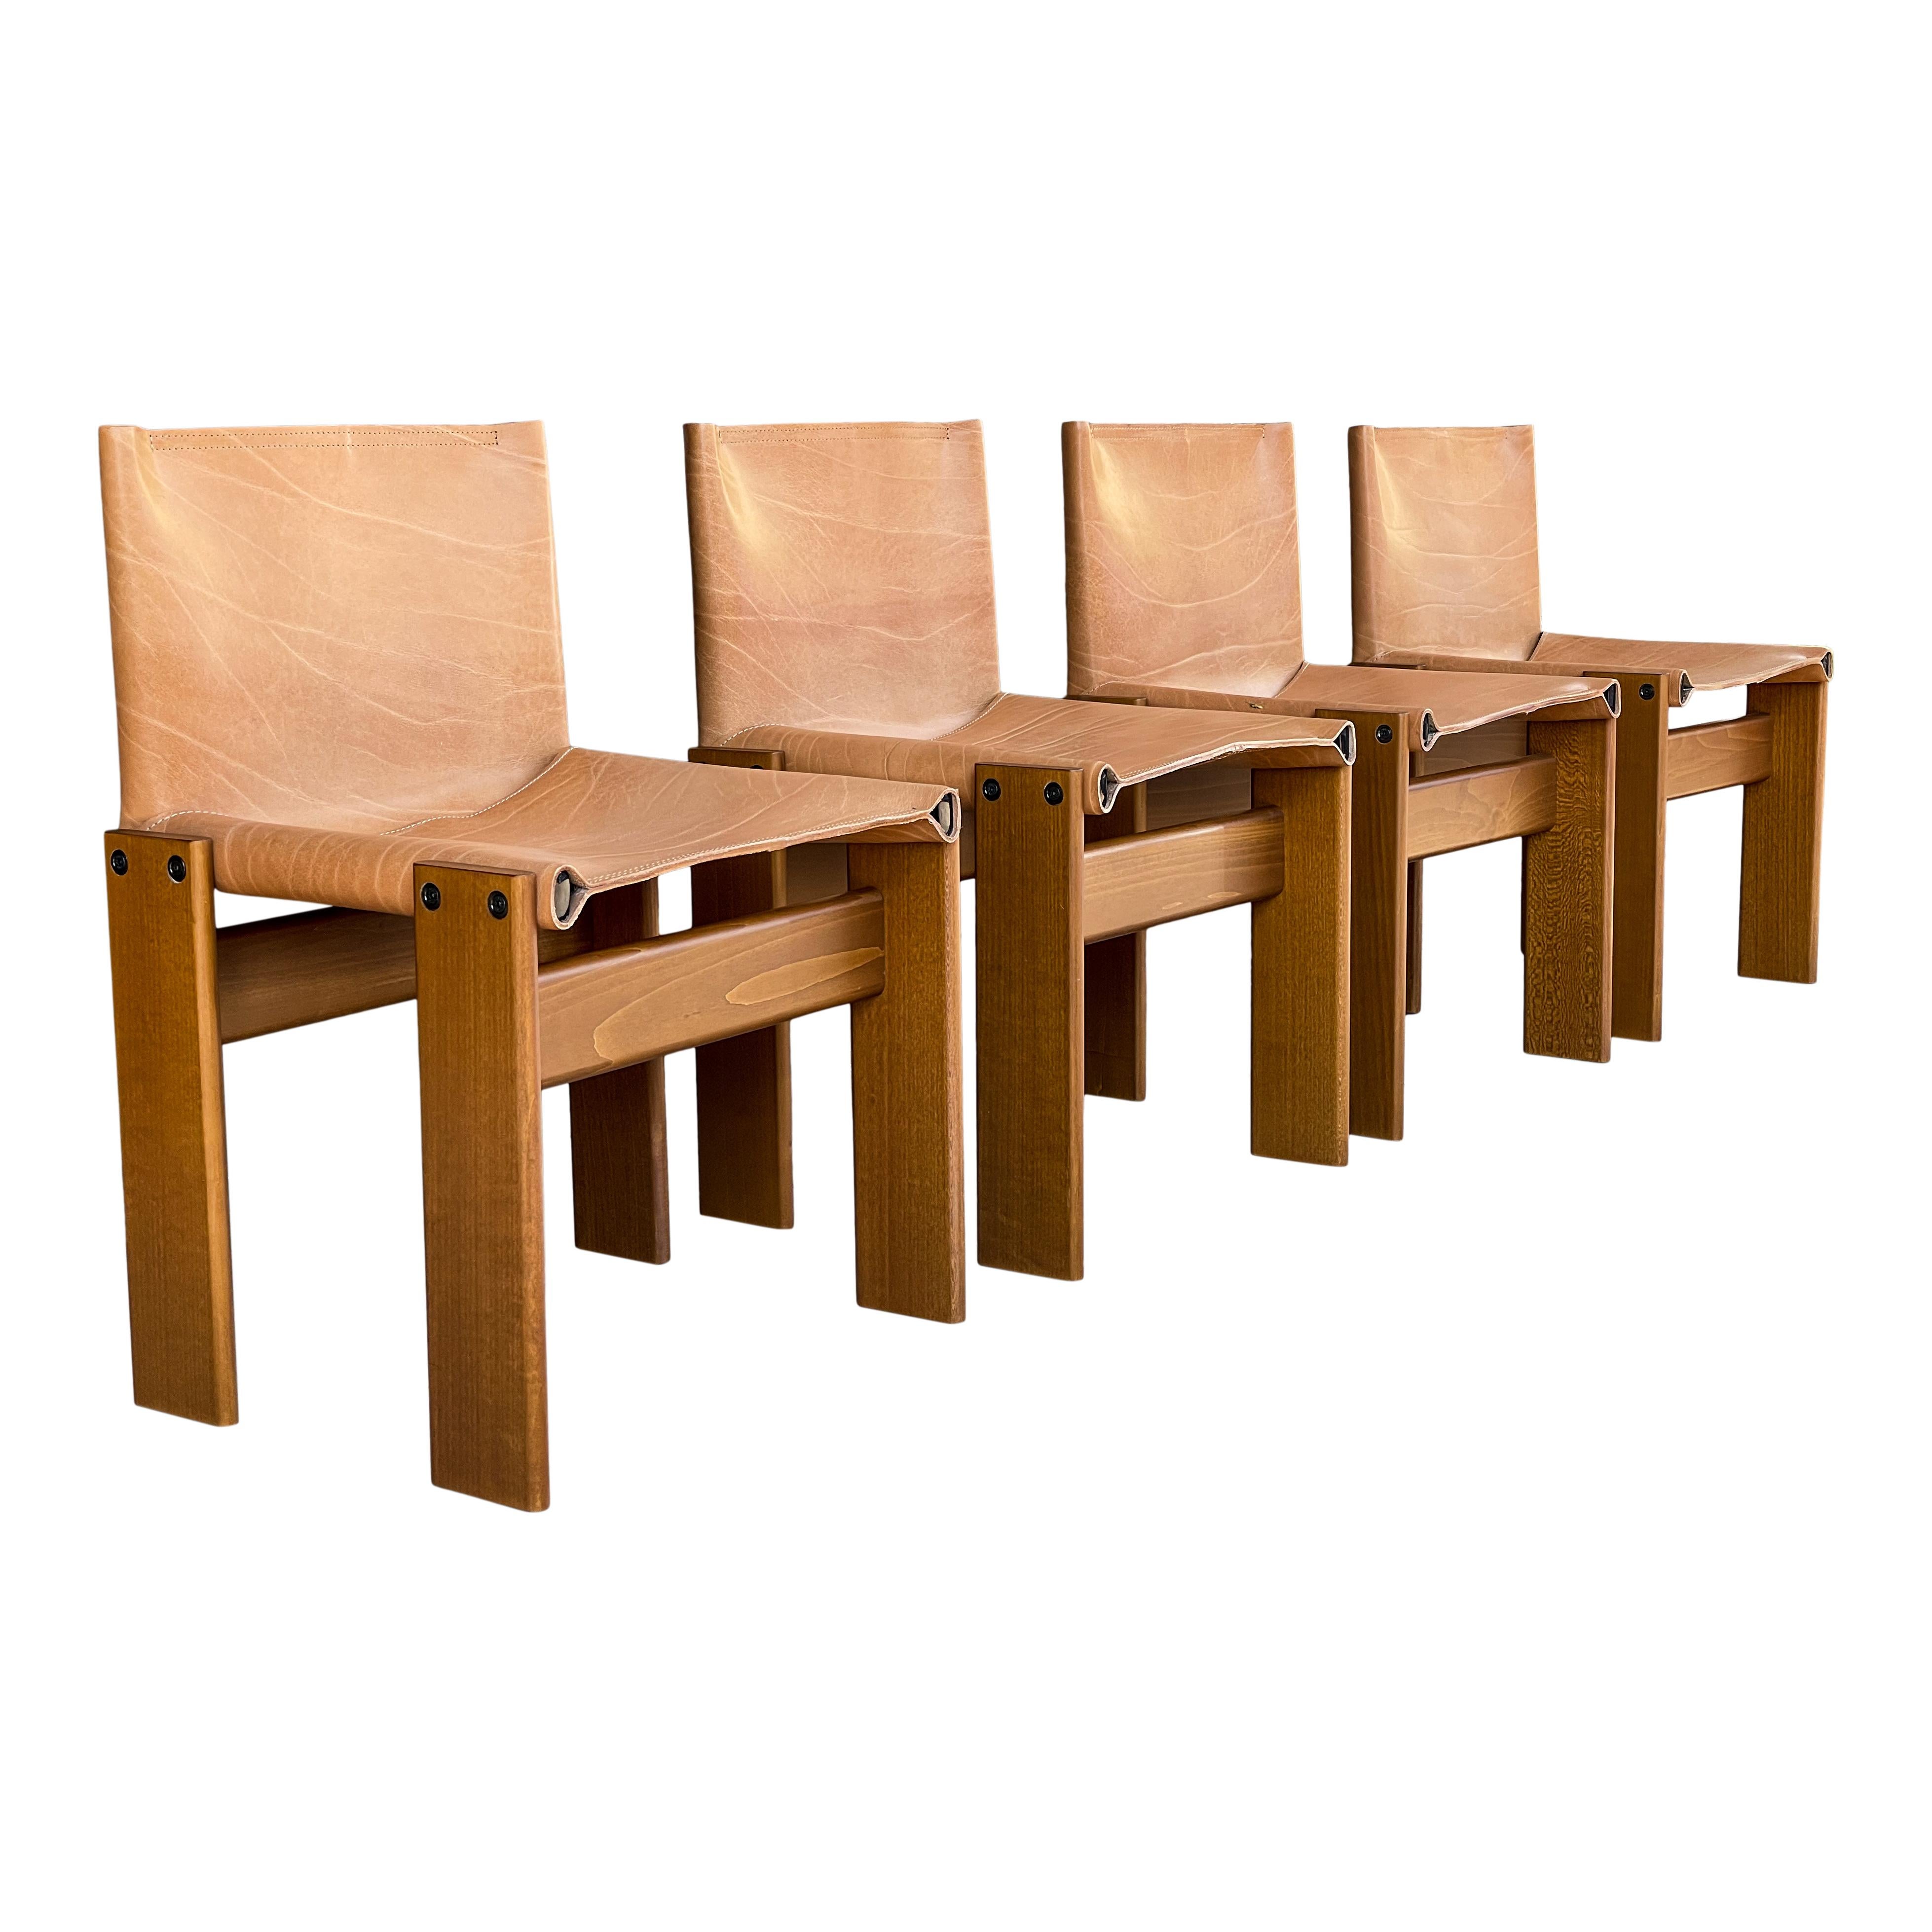 Set of four “Monk” dining chairs designed by Afra and Tobia Scarpa for Molteni in 1973.
Made of cognac leather and walnut.
Fully restored in Italy.

Interesting is the ‘flat’ shape of this chair where the designer has chosen to place the legs